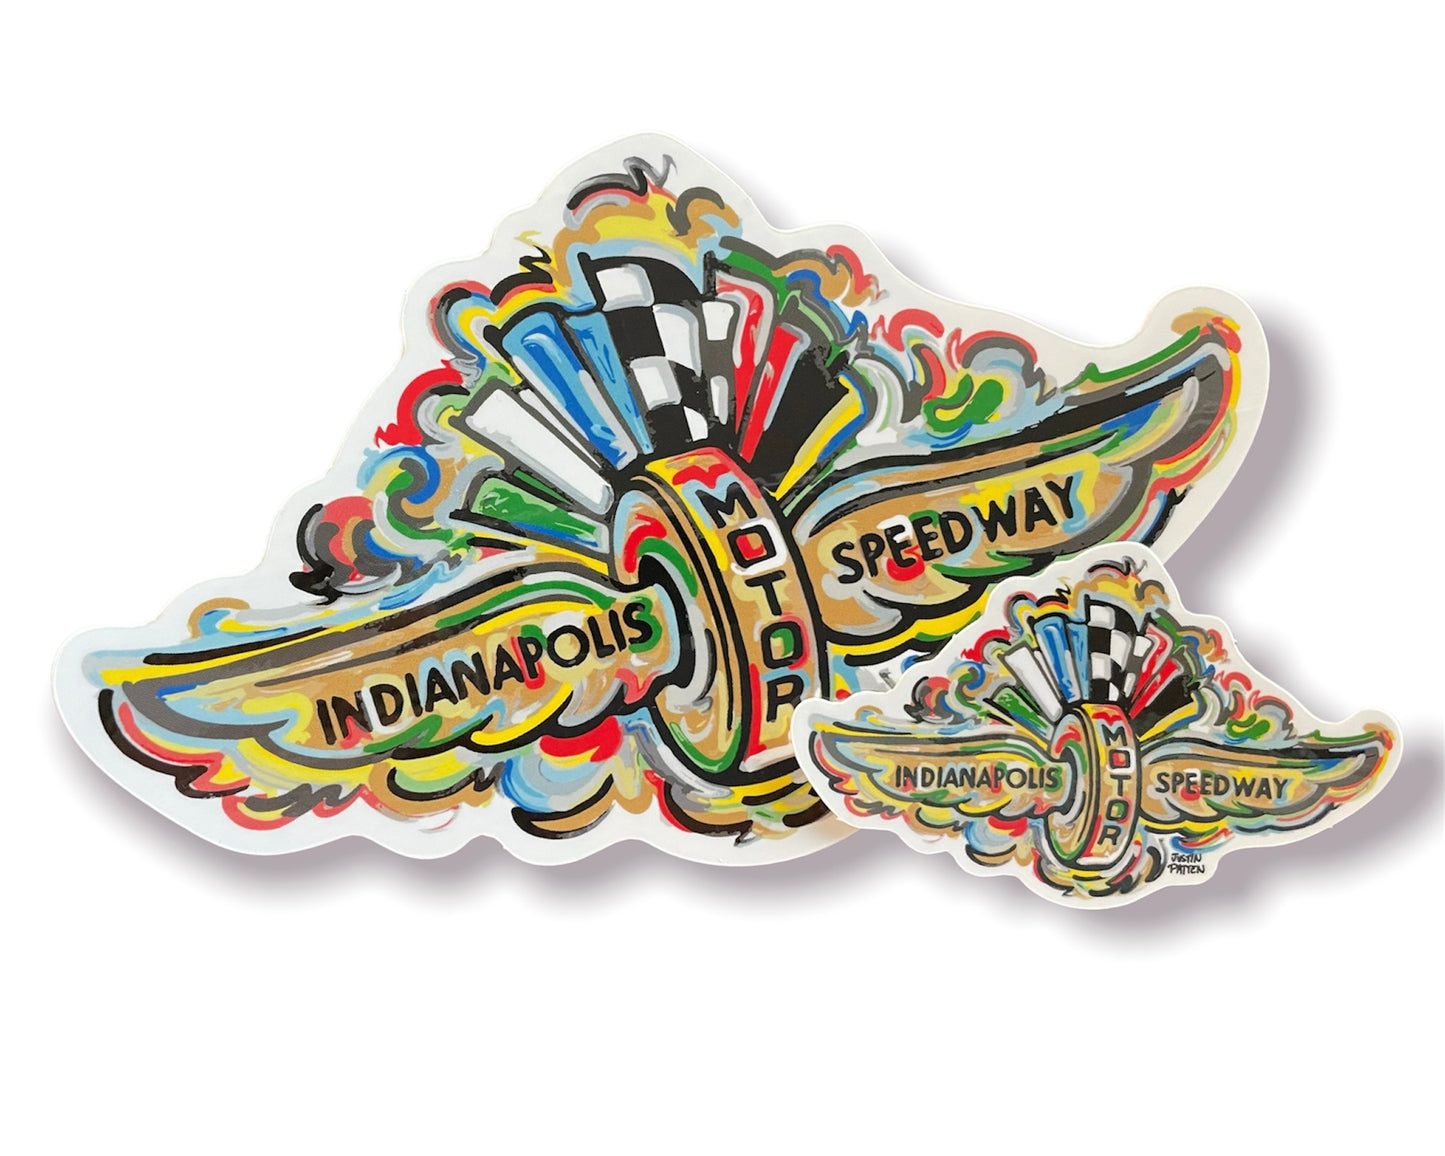 Indianapolis Motor Speedway Wing and Wheel Mini Vinyl Sticker by Justin Patten